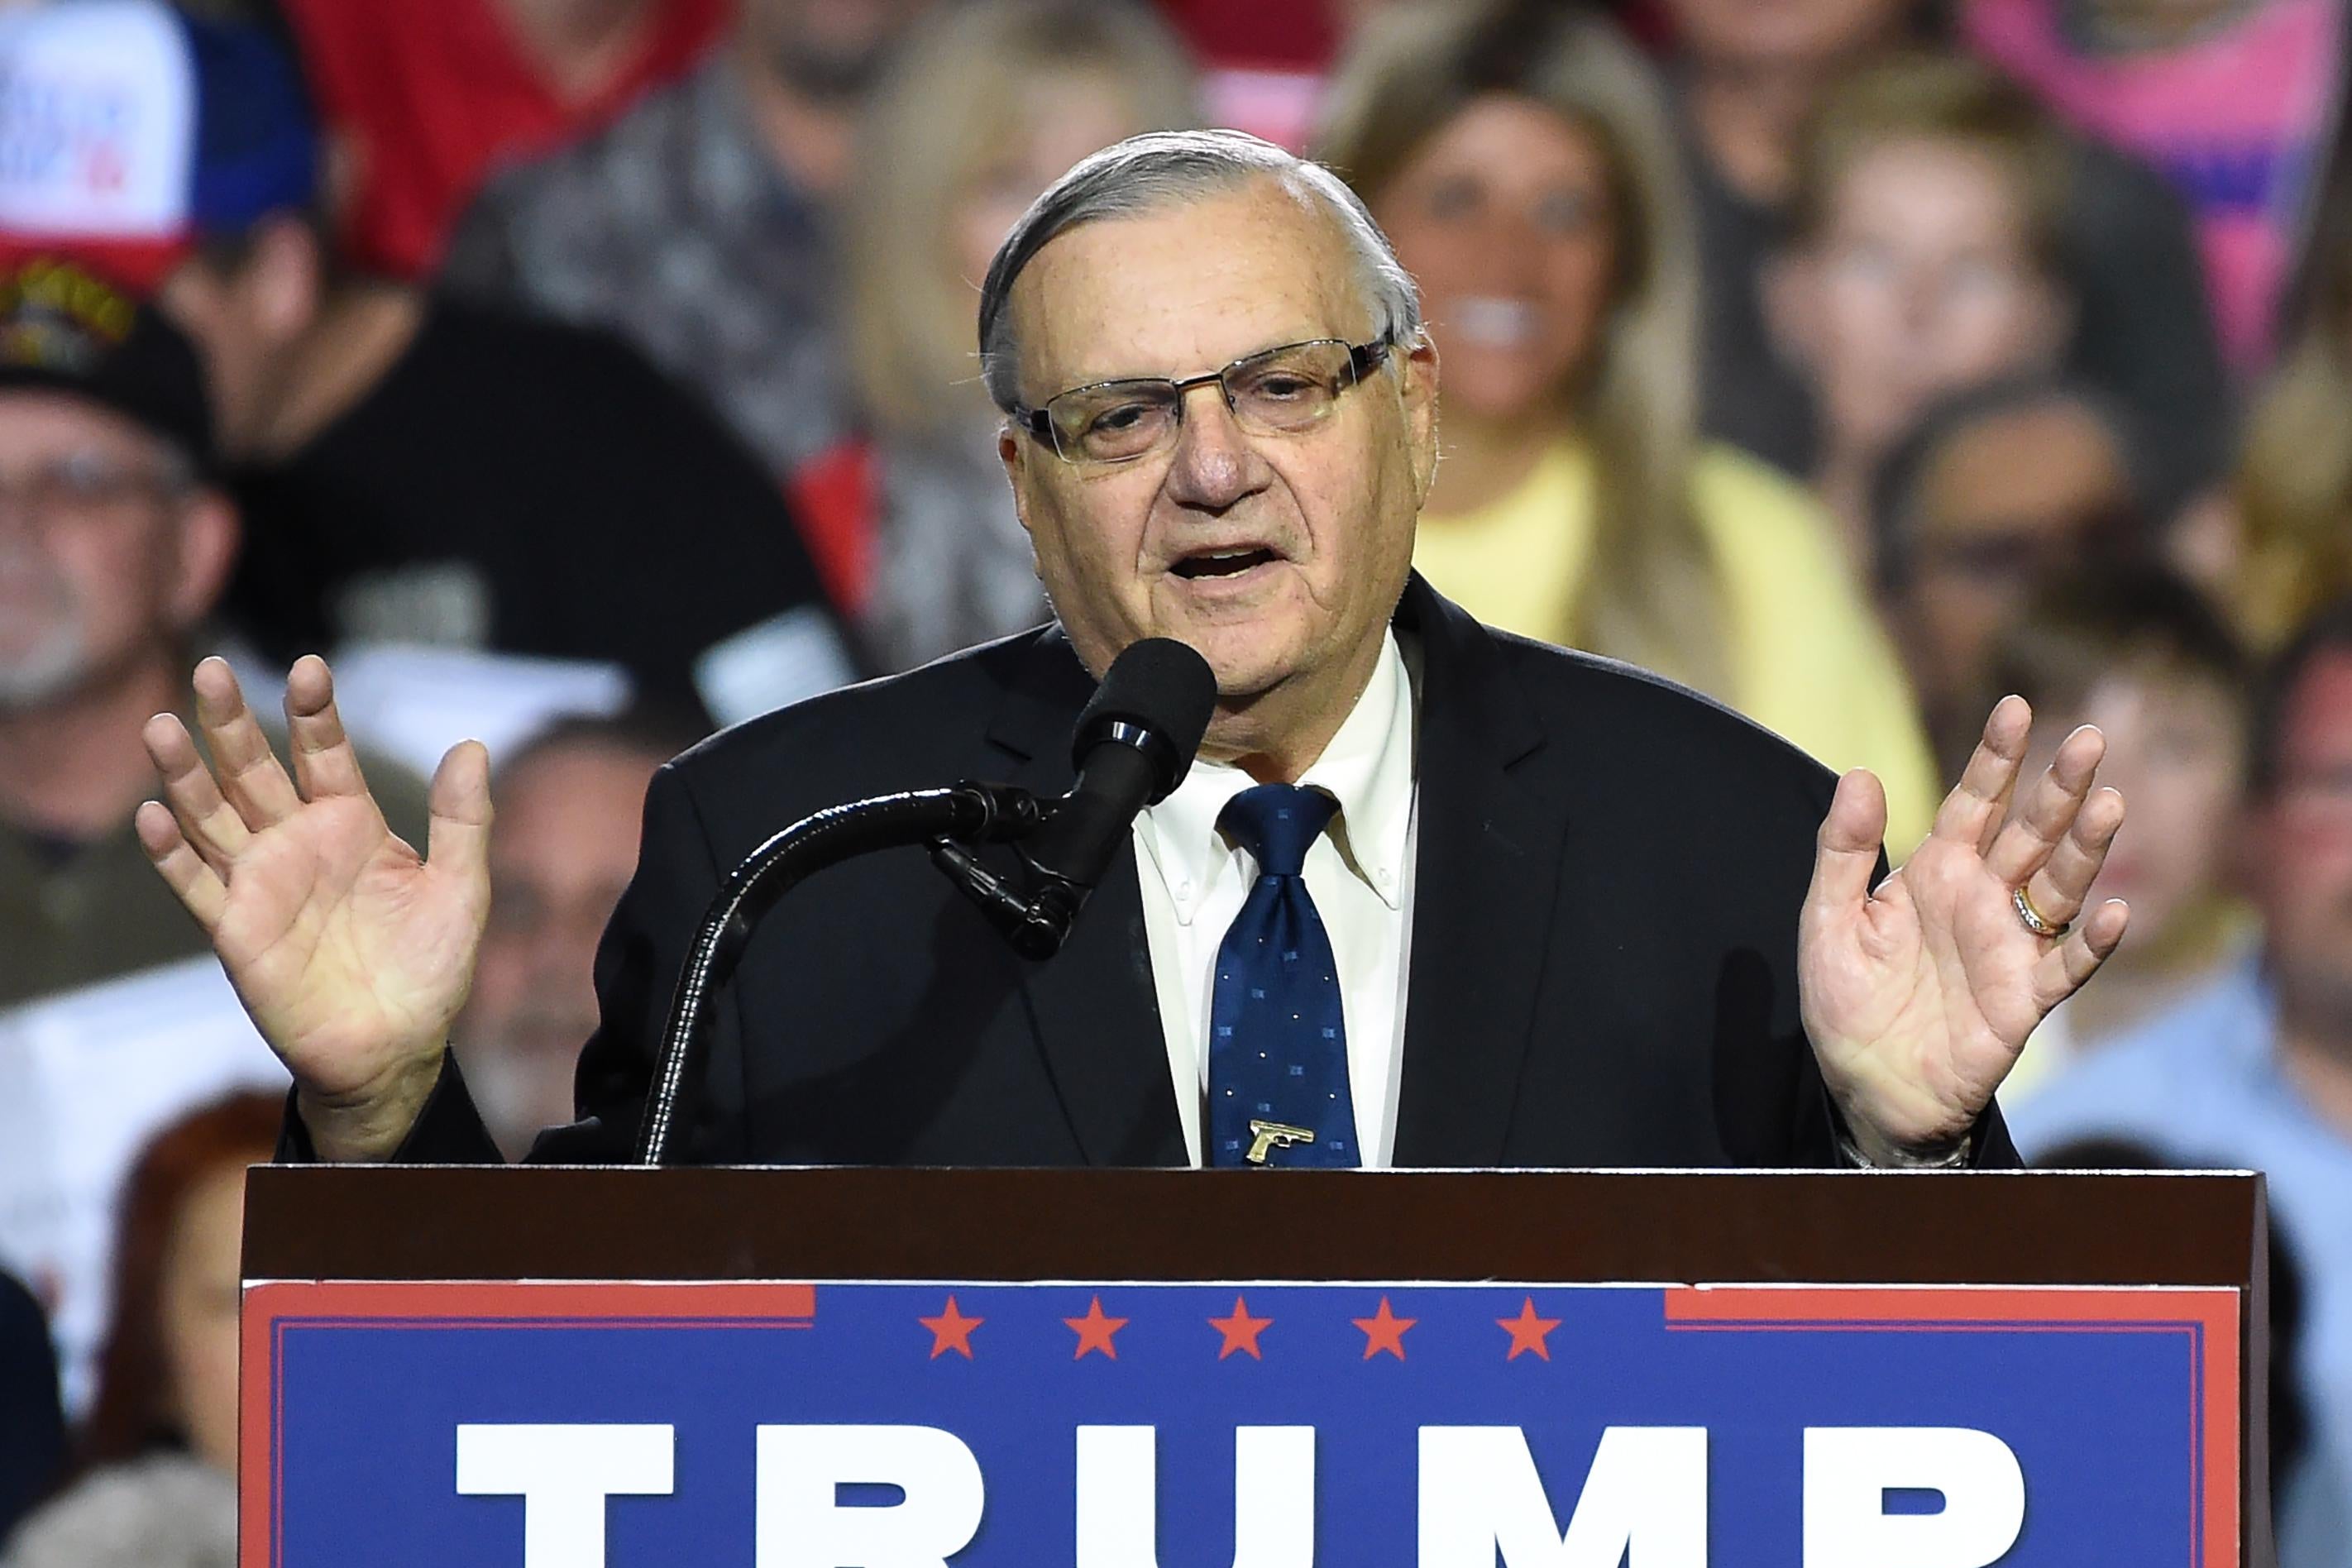 Sheriff Joe Arpaio attends a rally by Republican presidential candidate Donald Trump, October 4, 2016, in Prescott Valley, Arizona.
Arpaio will soon face criminal charges from federal prosecutors over his immigration patrols.  Federal prosecutors say they will charge Arpaio with contempt-of-court after he allegedly failed to obey a judges order to halt controversial immigration policies that some say include racial profiling.  / AFP / Robyn Beck        (Photo credit should read ROBYN BECK/AFP/Getty Images)